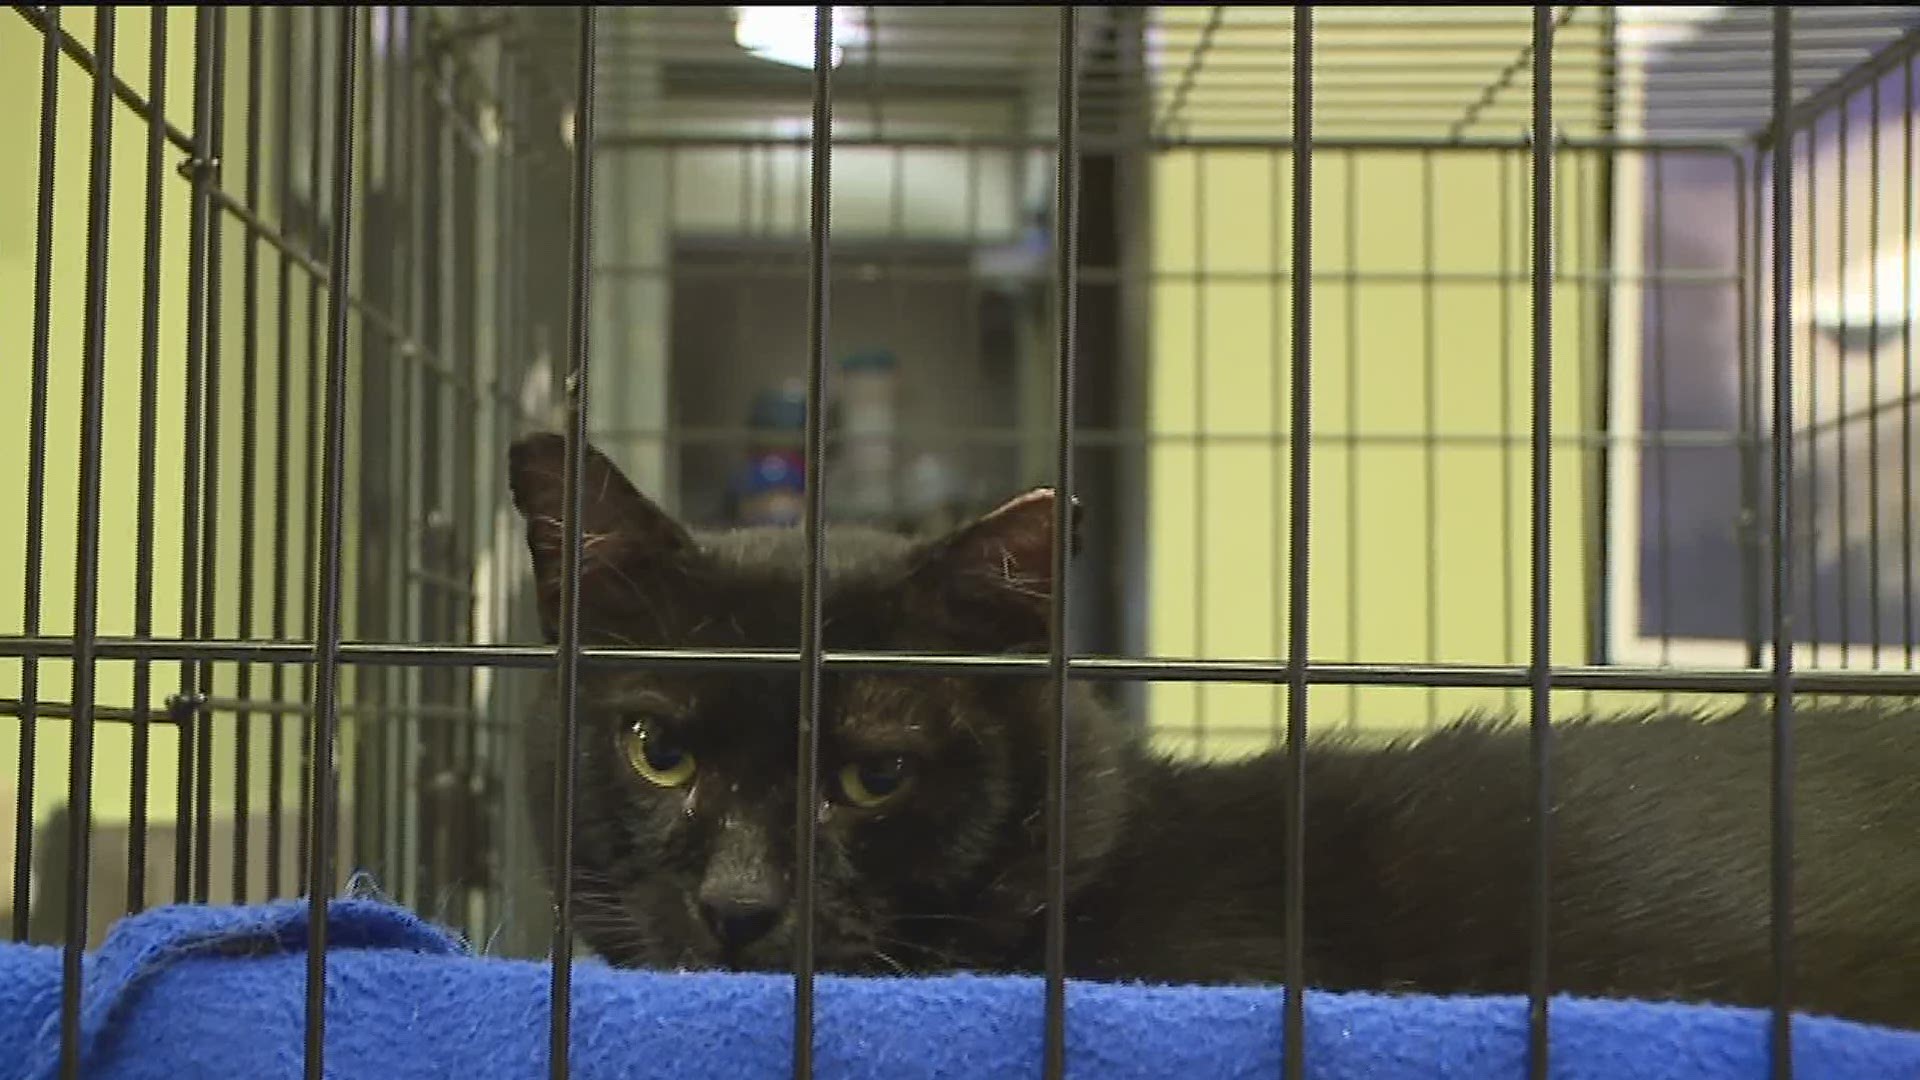 King's Harvest Pet Rescue says they started quarantine out strong, nearly clearing out the entire shelter. Now, they're filling back up with fewer resources.